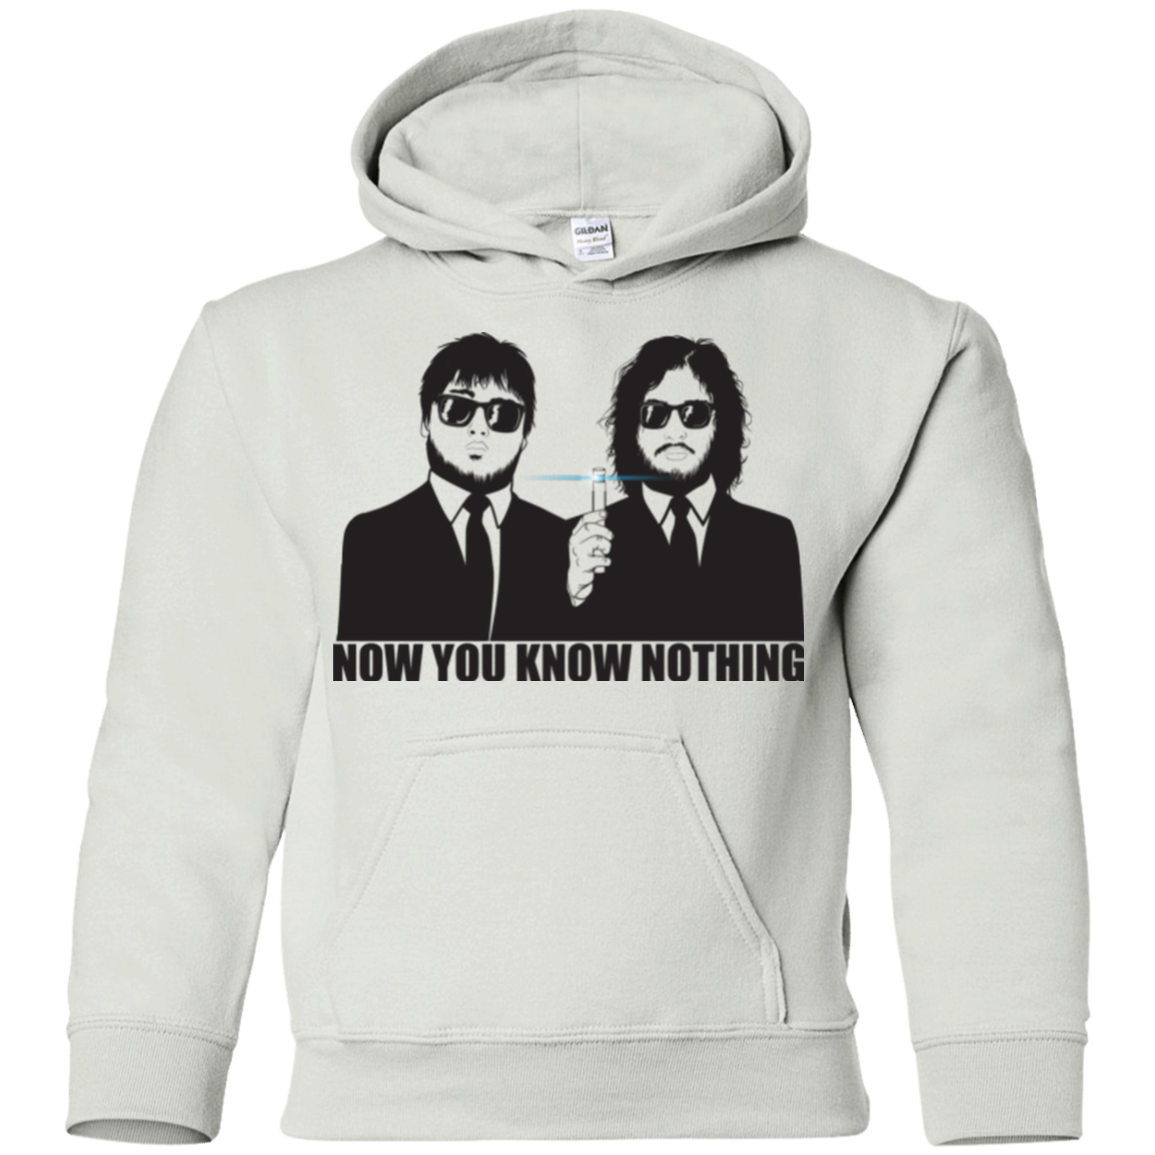 NOW YOU KNOW NOTHING Youth Hoodie